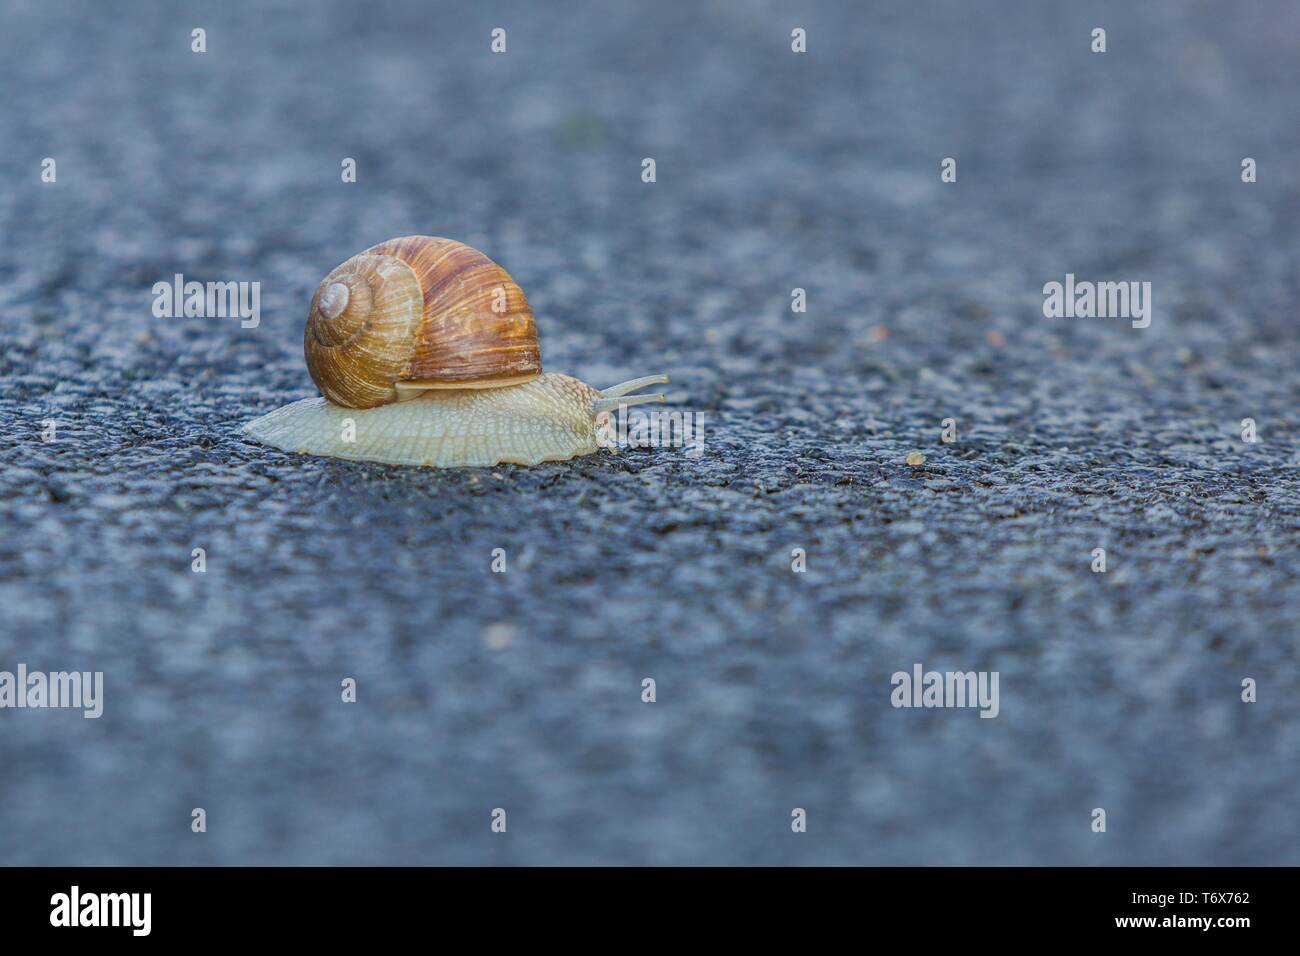 Large grey land snail with creamy brownish shell crawling slowly on wet macadam street. Blurry background and foreground. Stock Photo